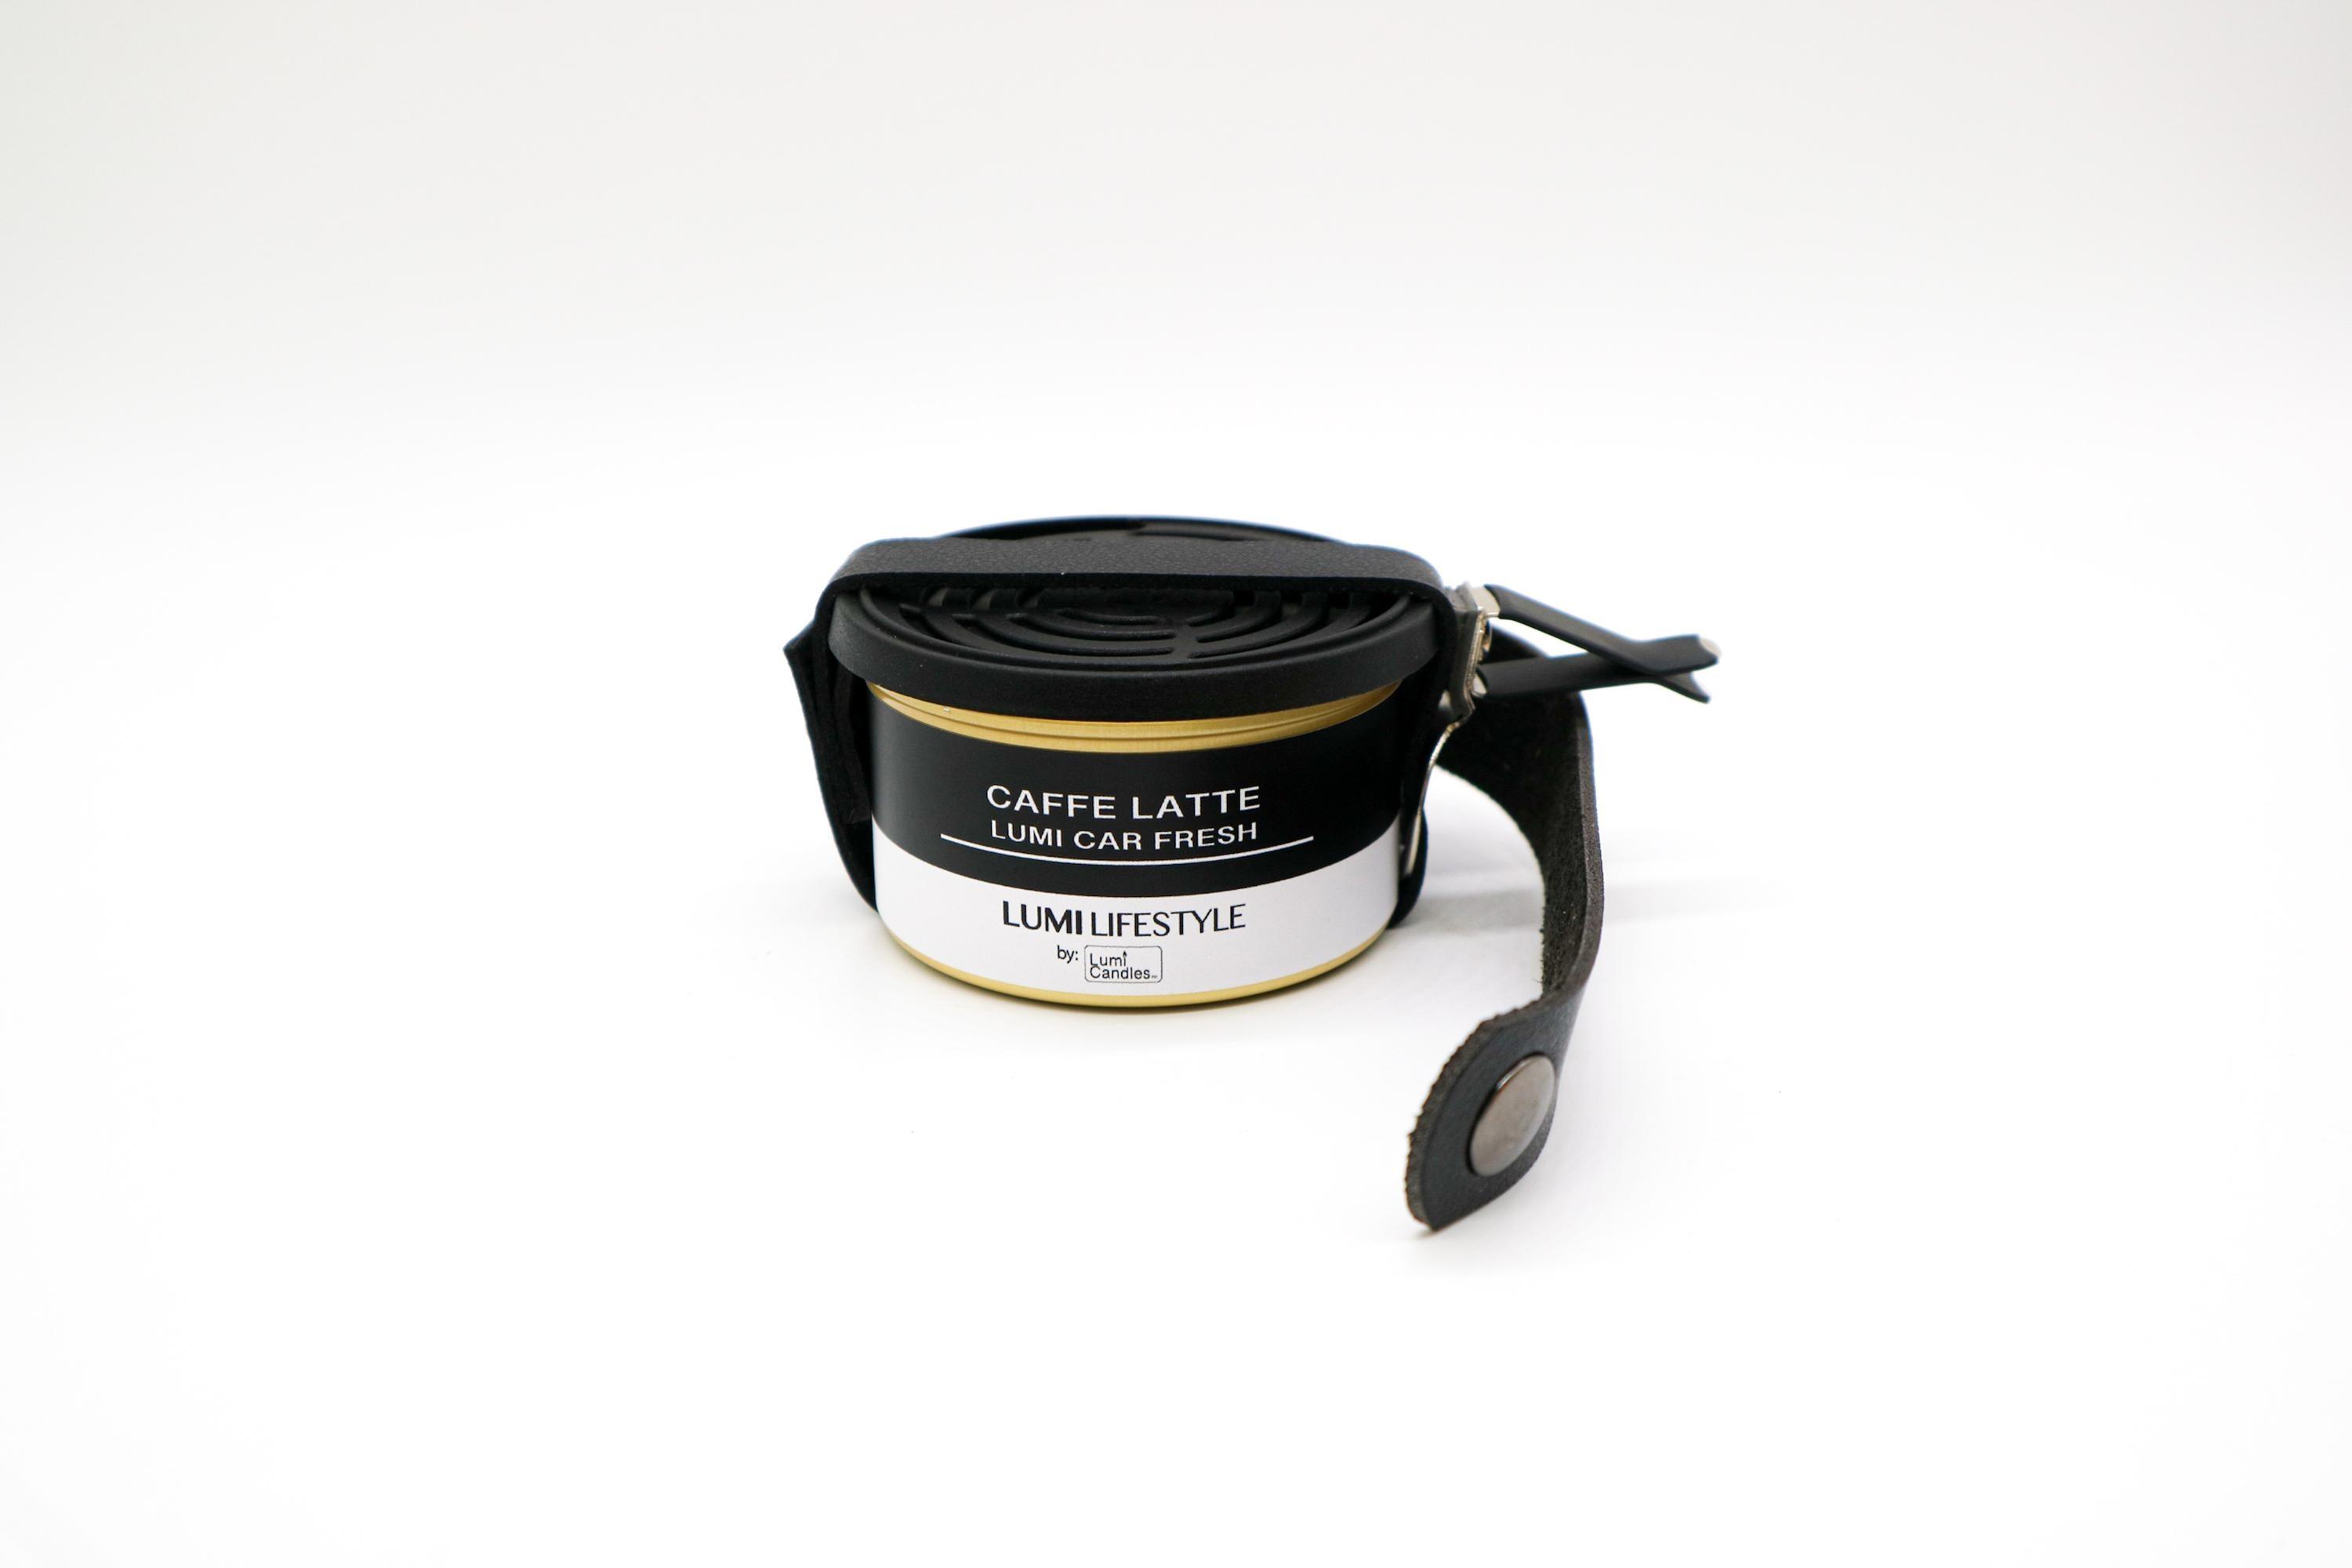 Caffe Latte Car Freshener with leather case by LUMI Candles PH